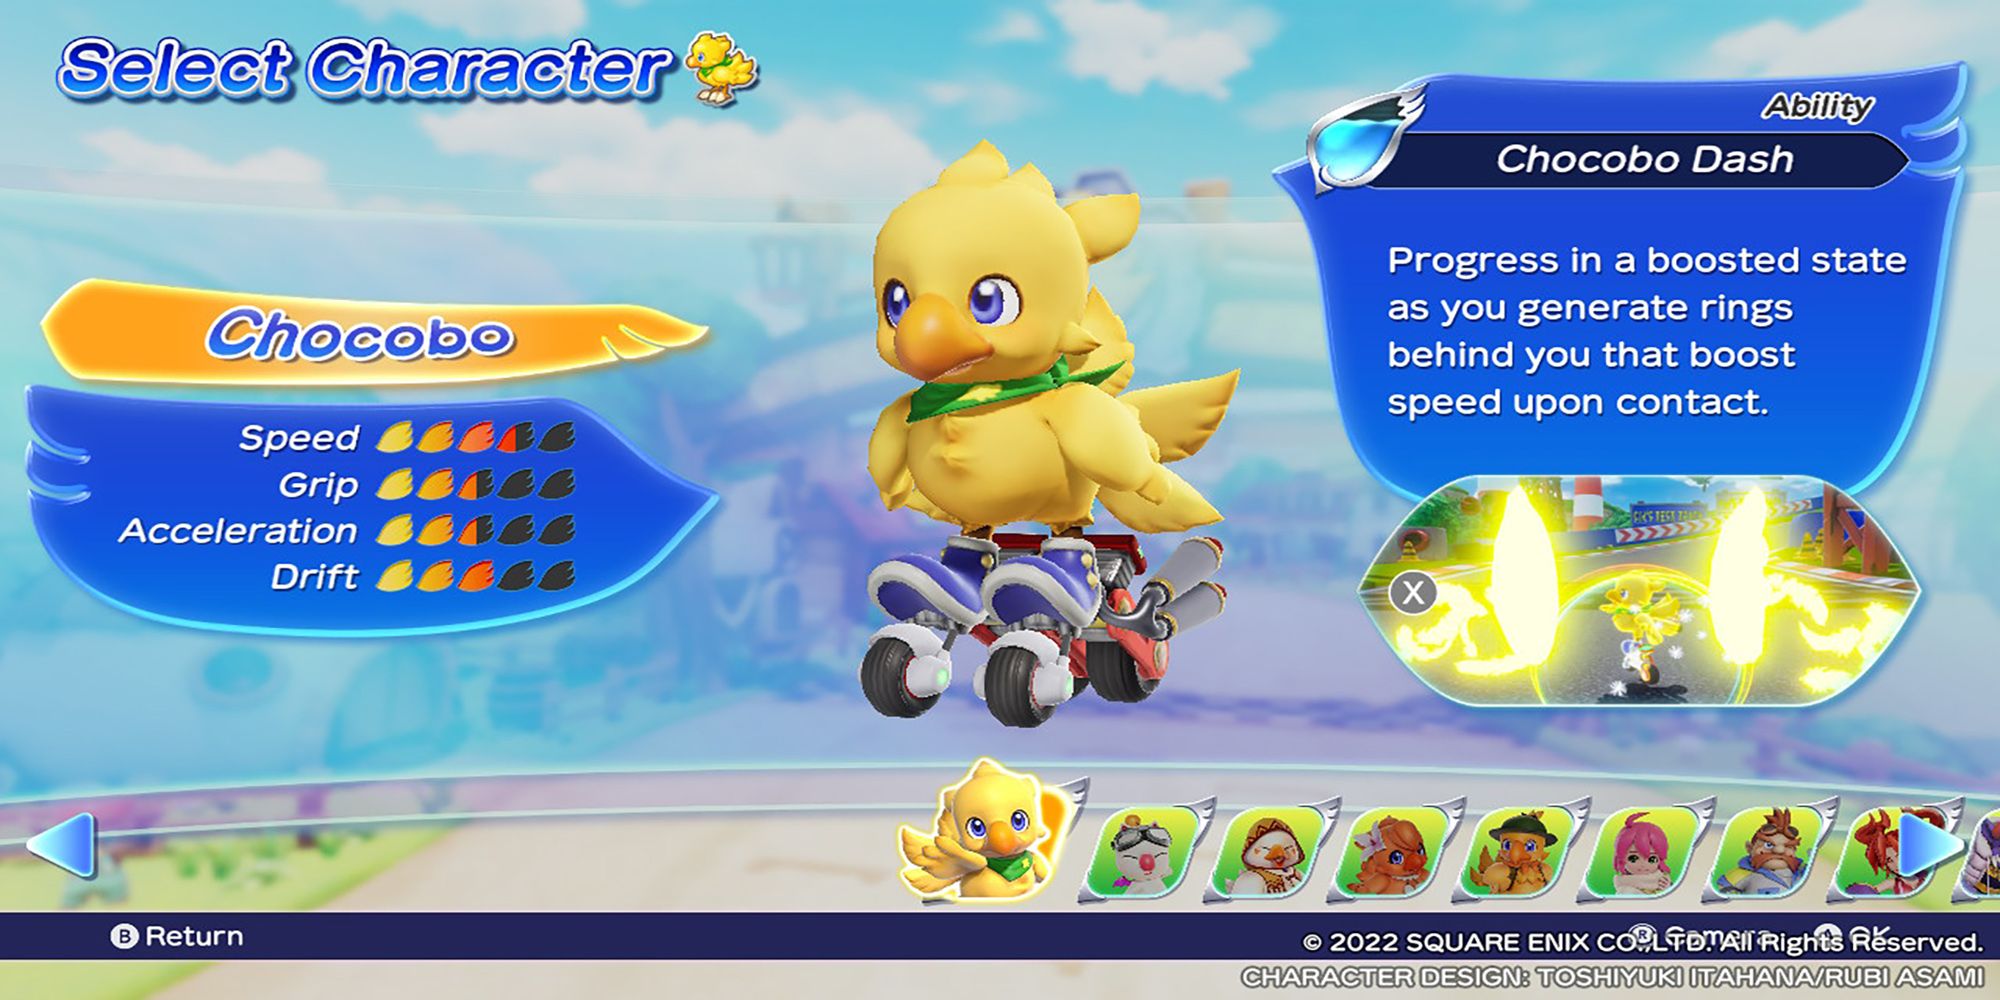 Chocobo's character model, along with his stats and abilities, in the Select Character menu. Chocobo GP.